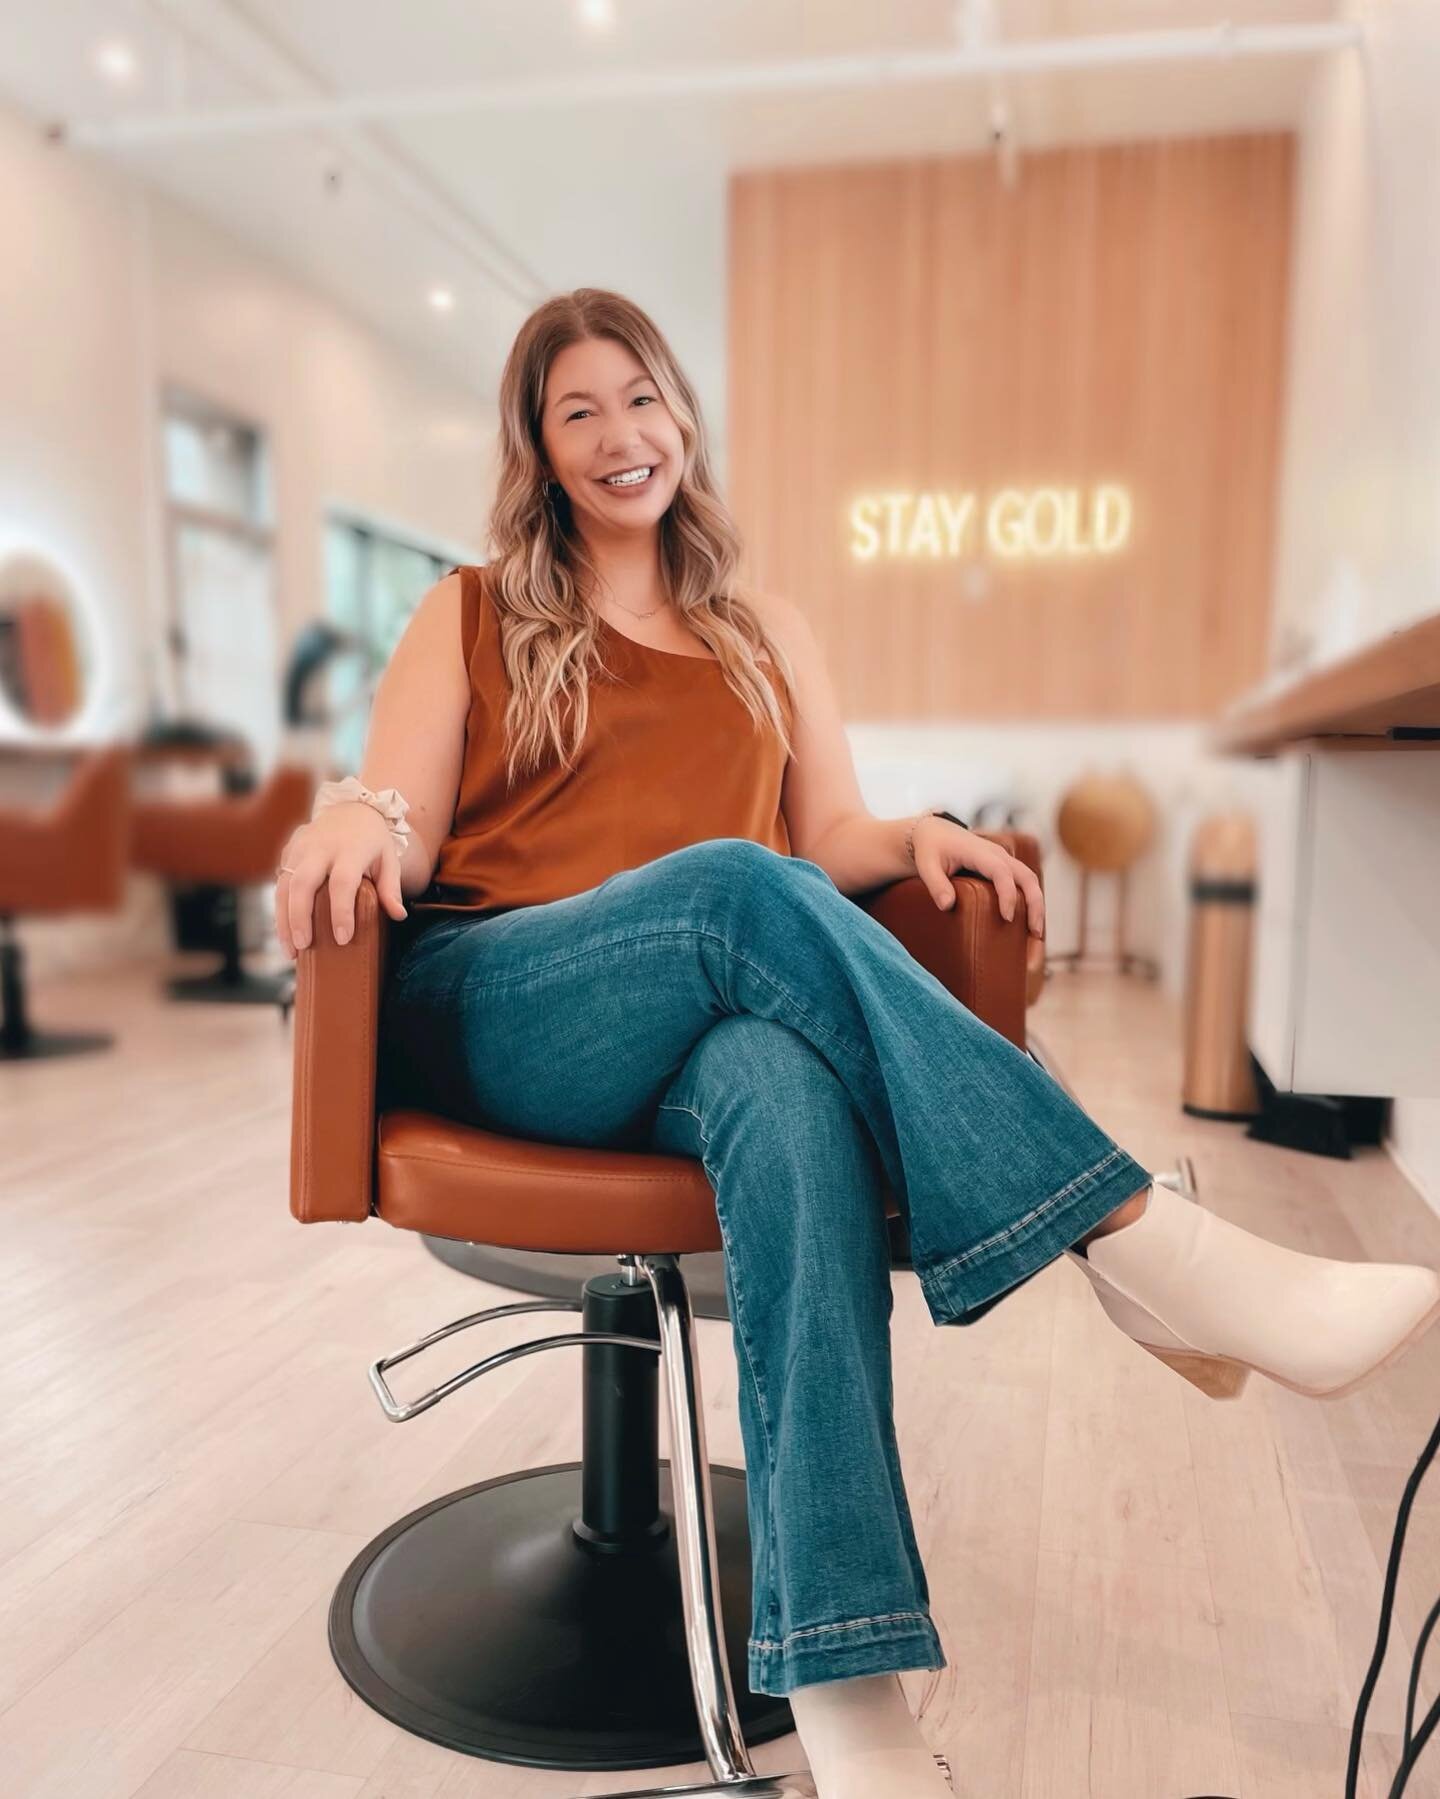 Meet Kelly, the newest G&amp;S team member and check out some of her amazing work! You can find her on Instagram at @24kgoldandsass and can book with her by calling the salon, online at goldandsass.com or messaging us! ✨

#staygold #kalamazoosalon #k